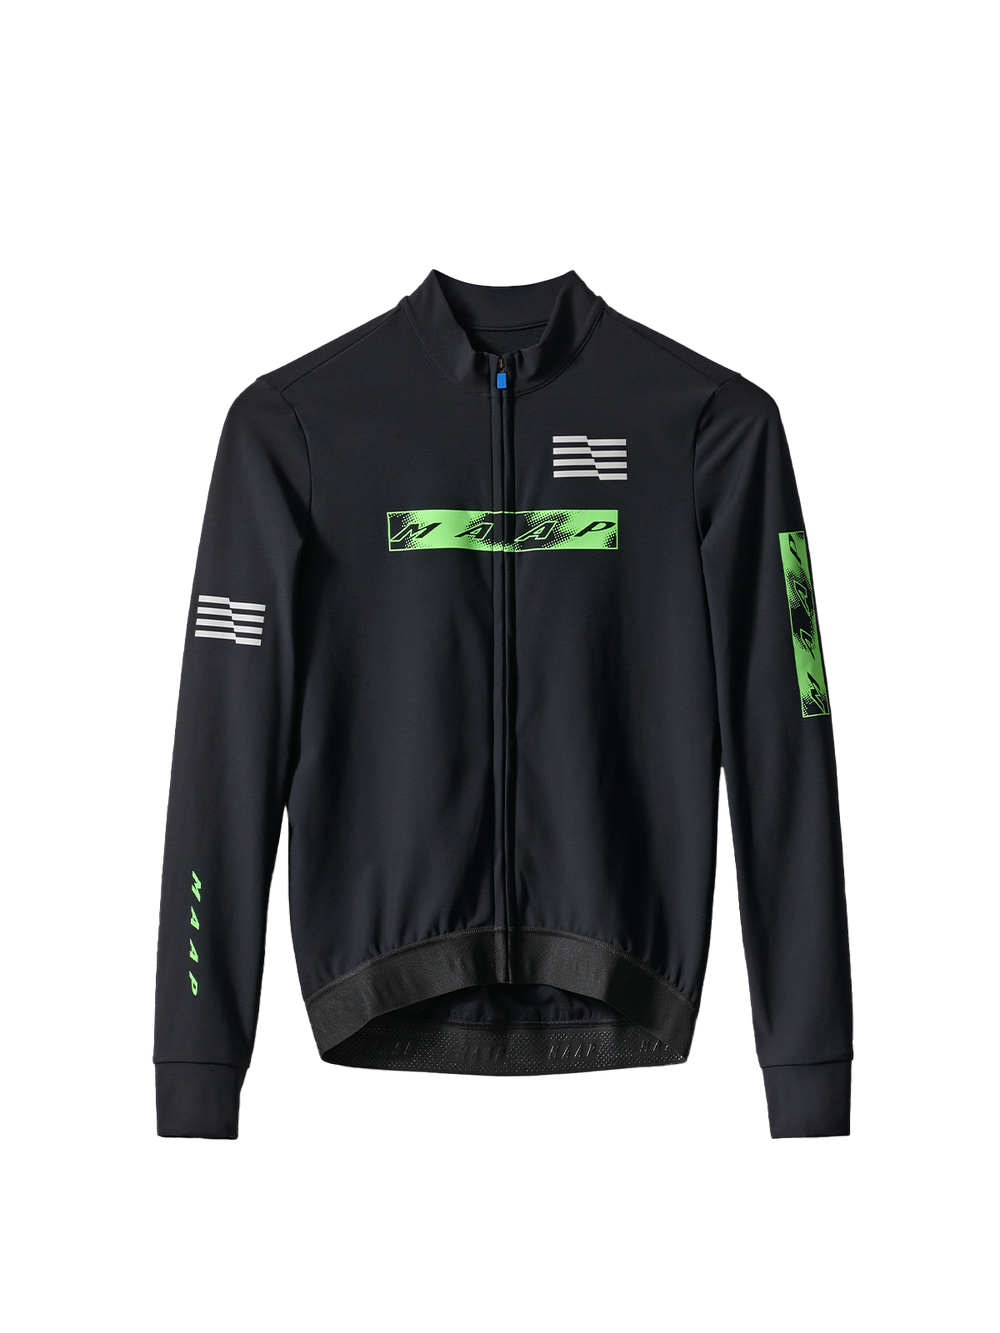 Product Image for LPW Thermal LS Jersey